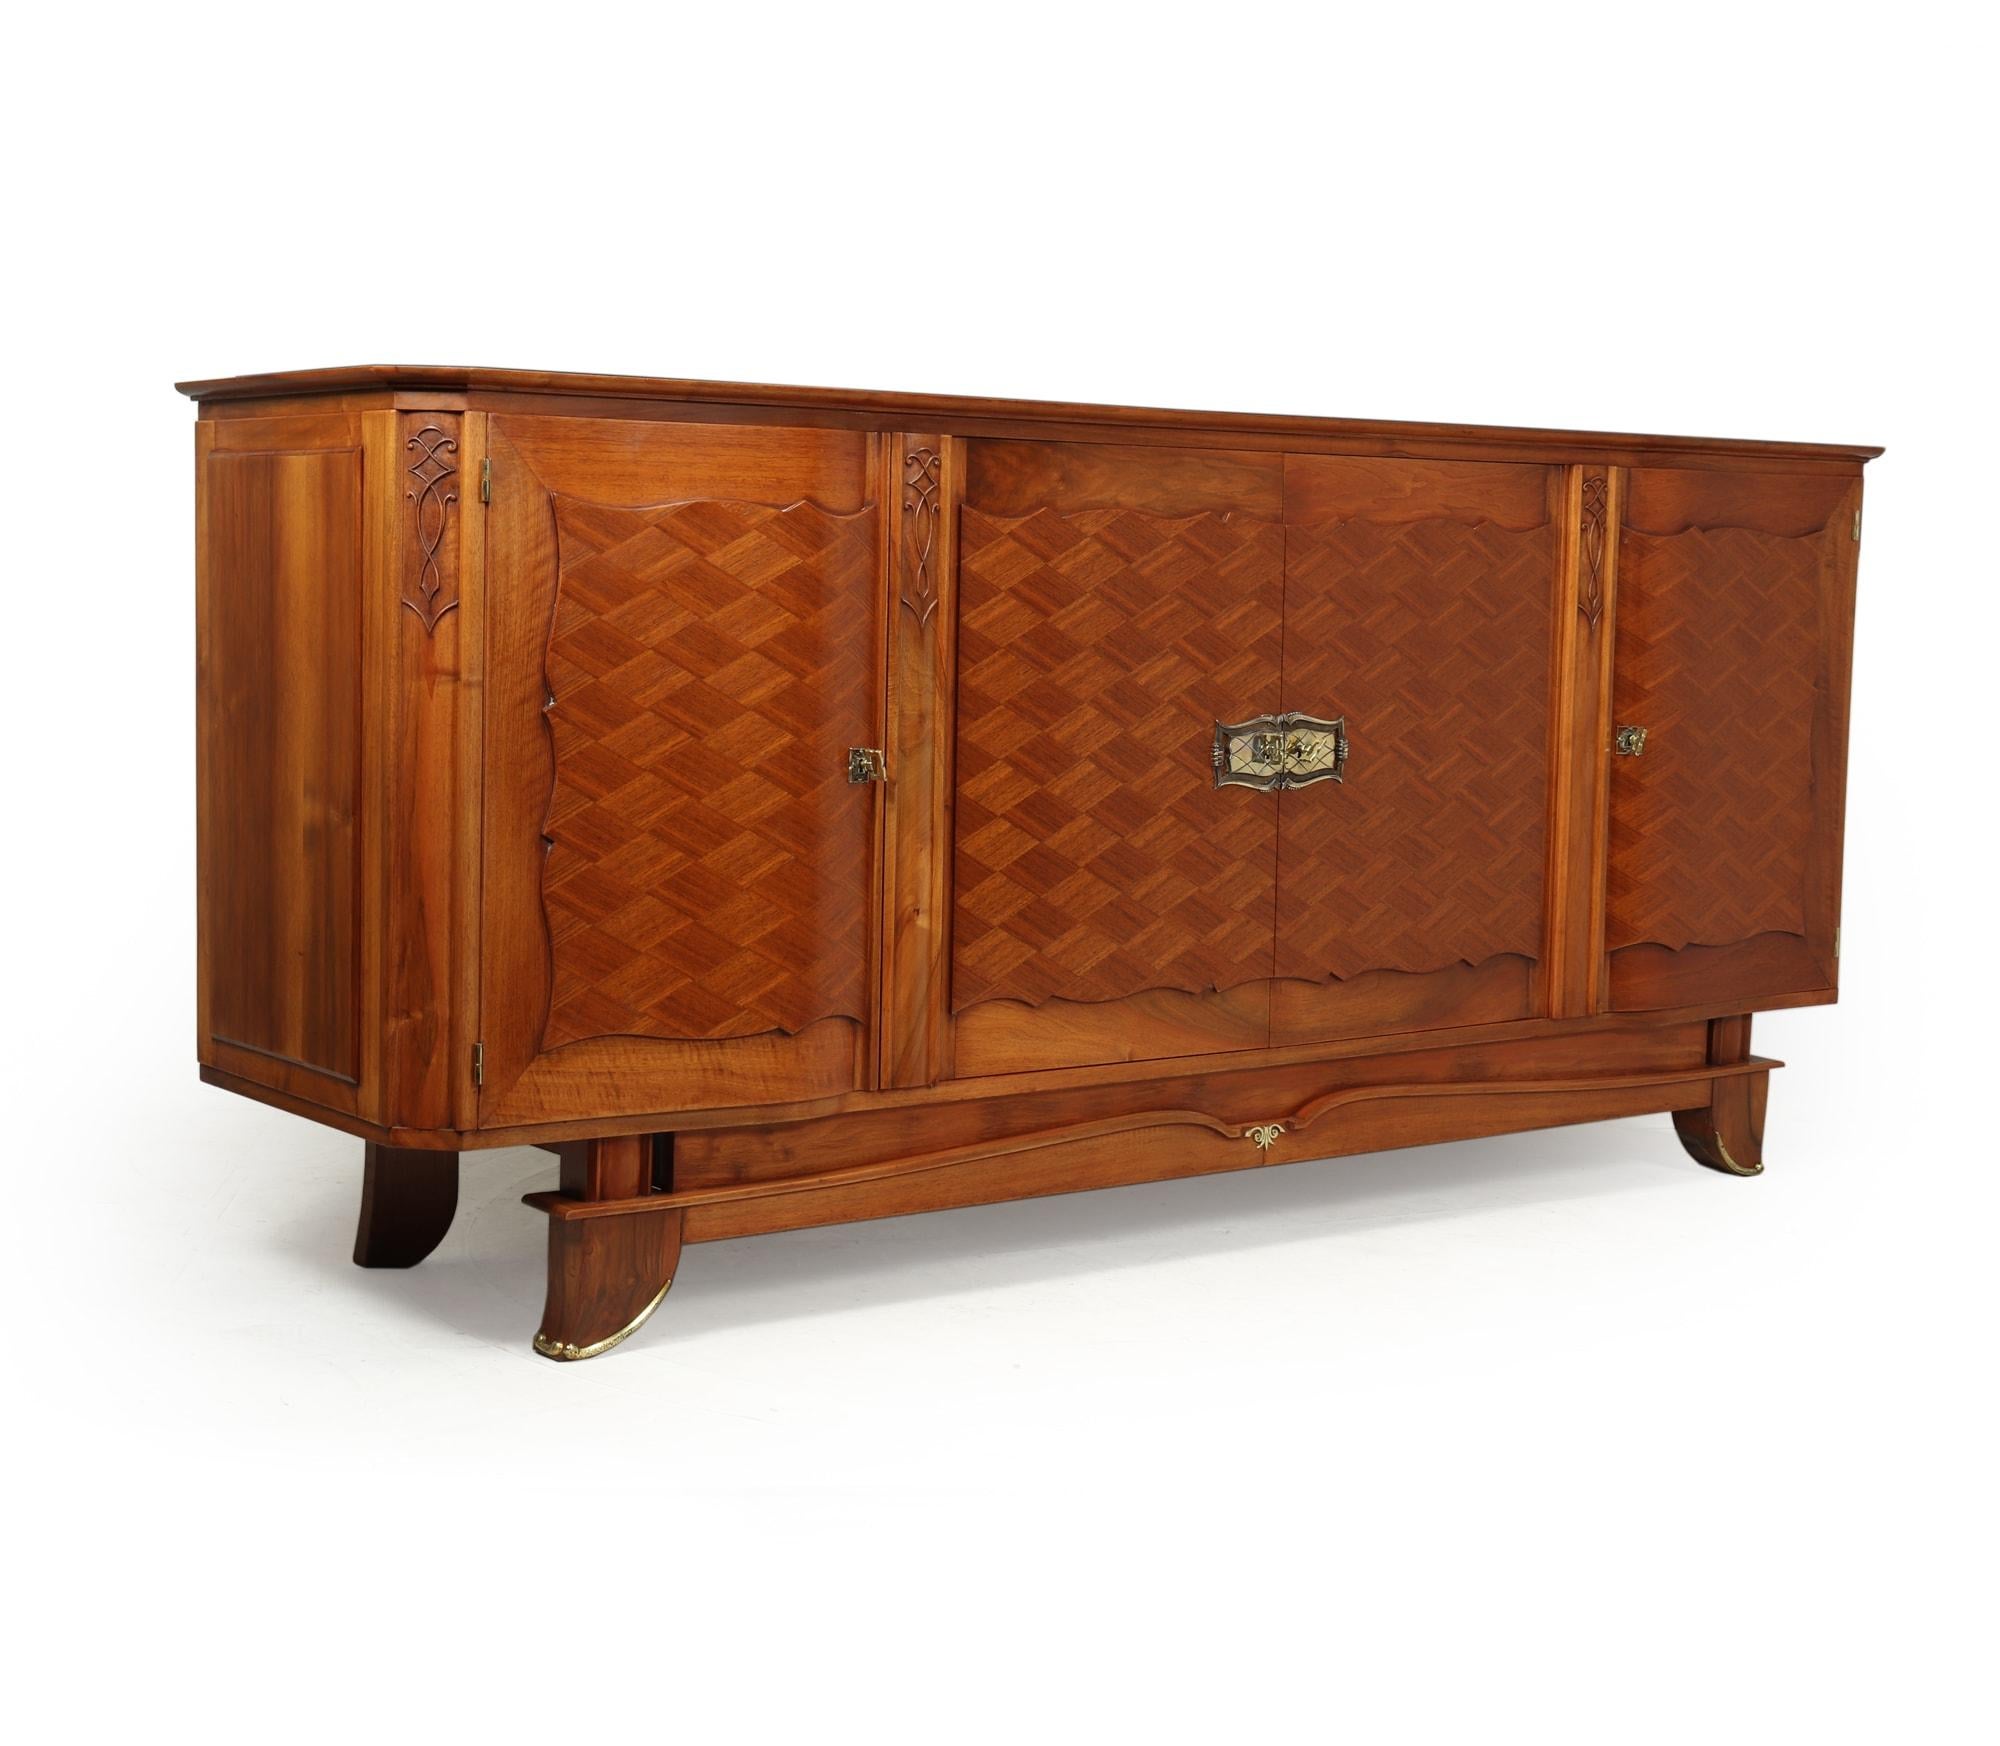 Walnut parquetry sideboard by Jules Leleu c1950
An exceptional quality four door sideboard designed and produced by Jules Leleu in the early 1950s in Paris France, the sideboard is of solid walnut with walnut parquetry inlay with gilt metal mounts